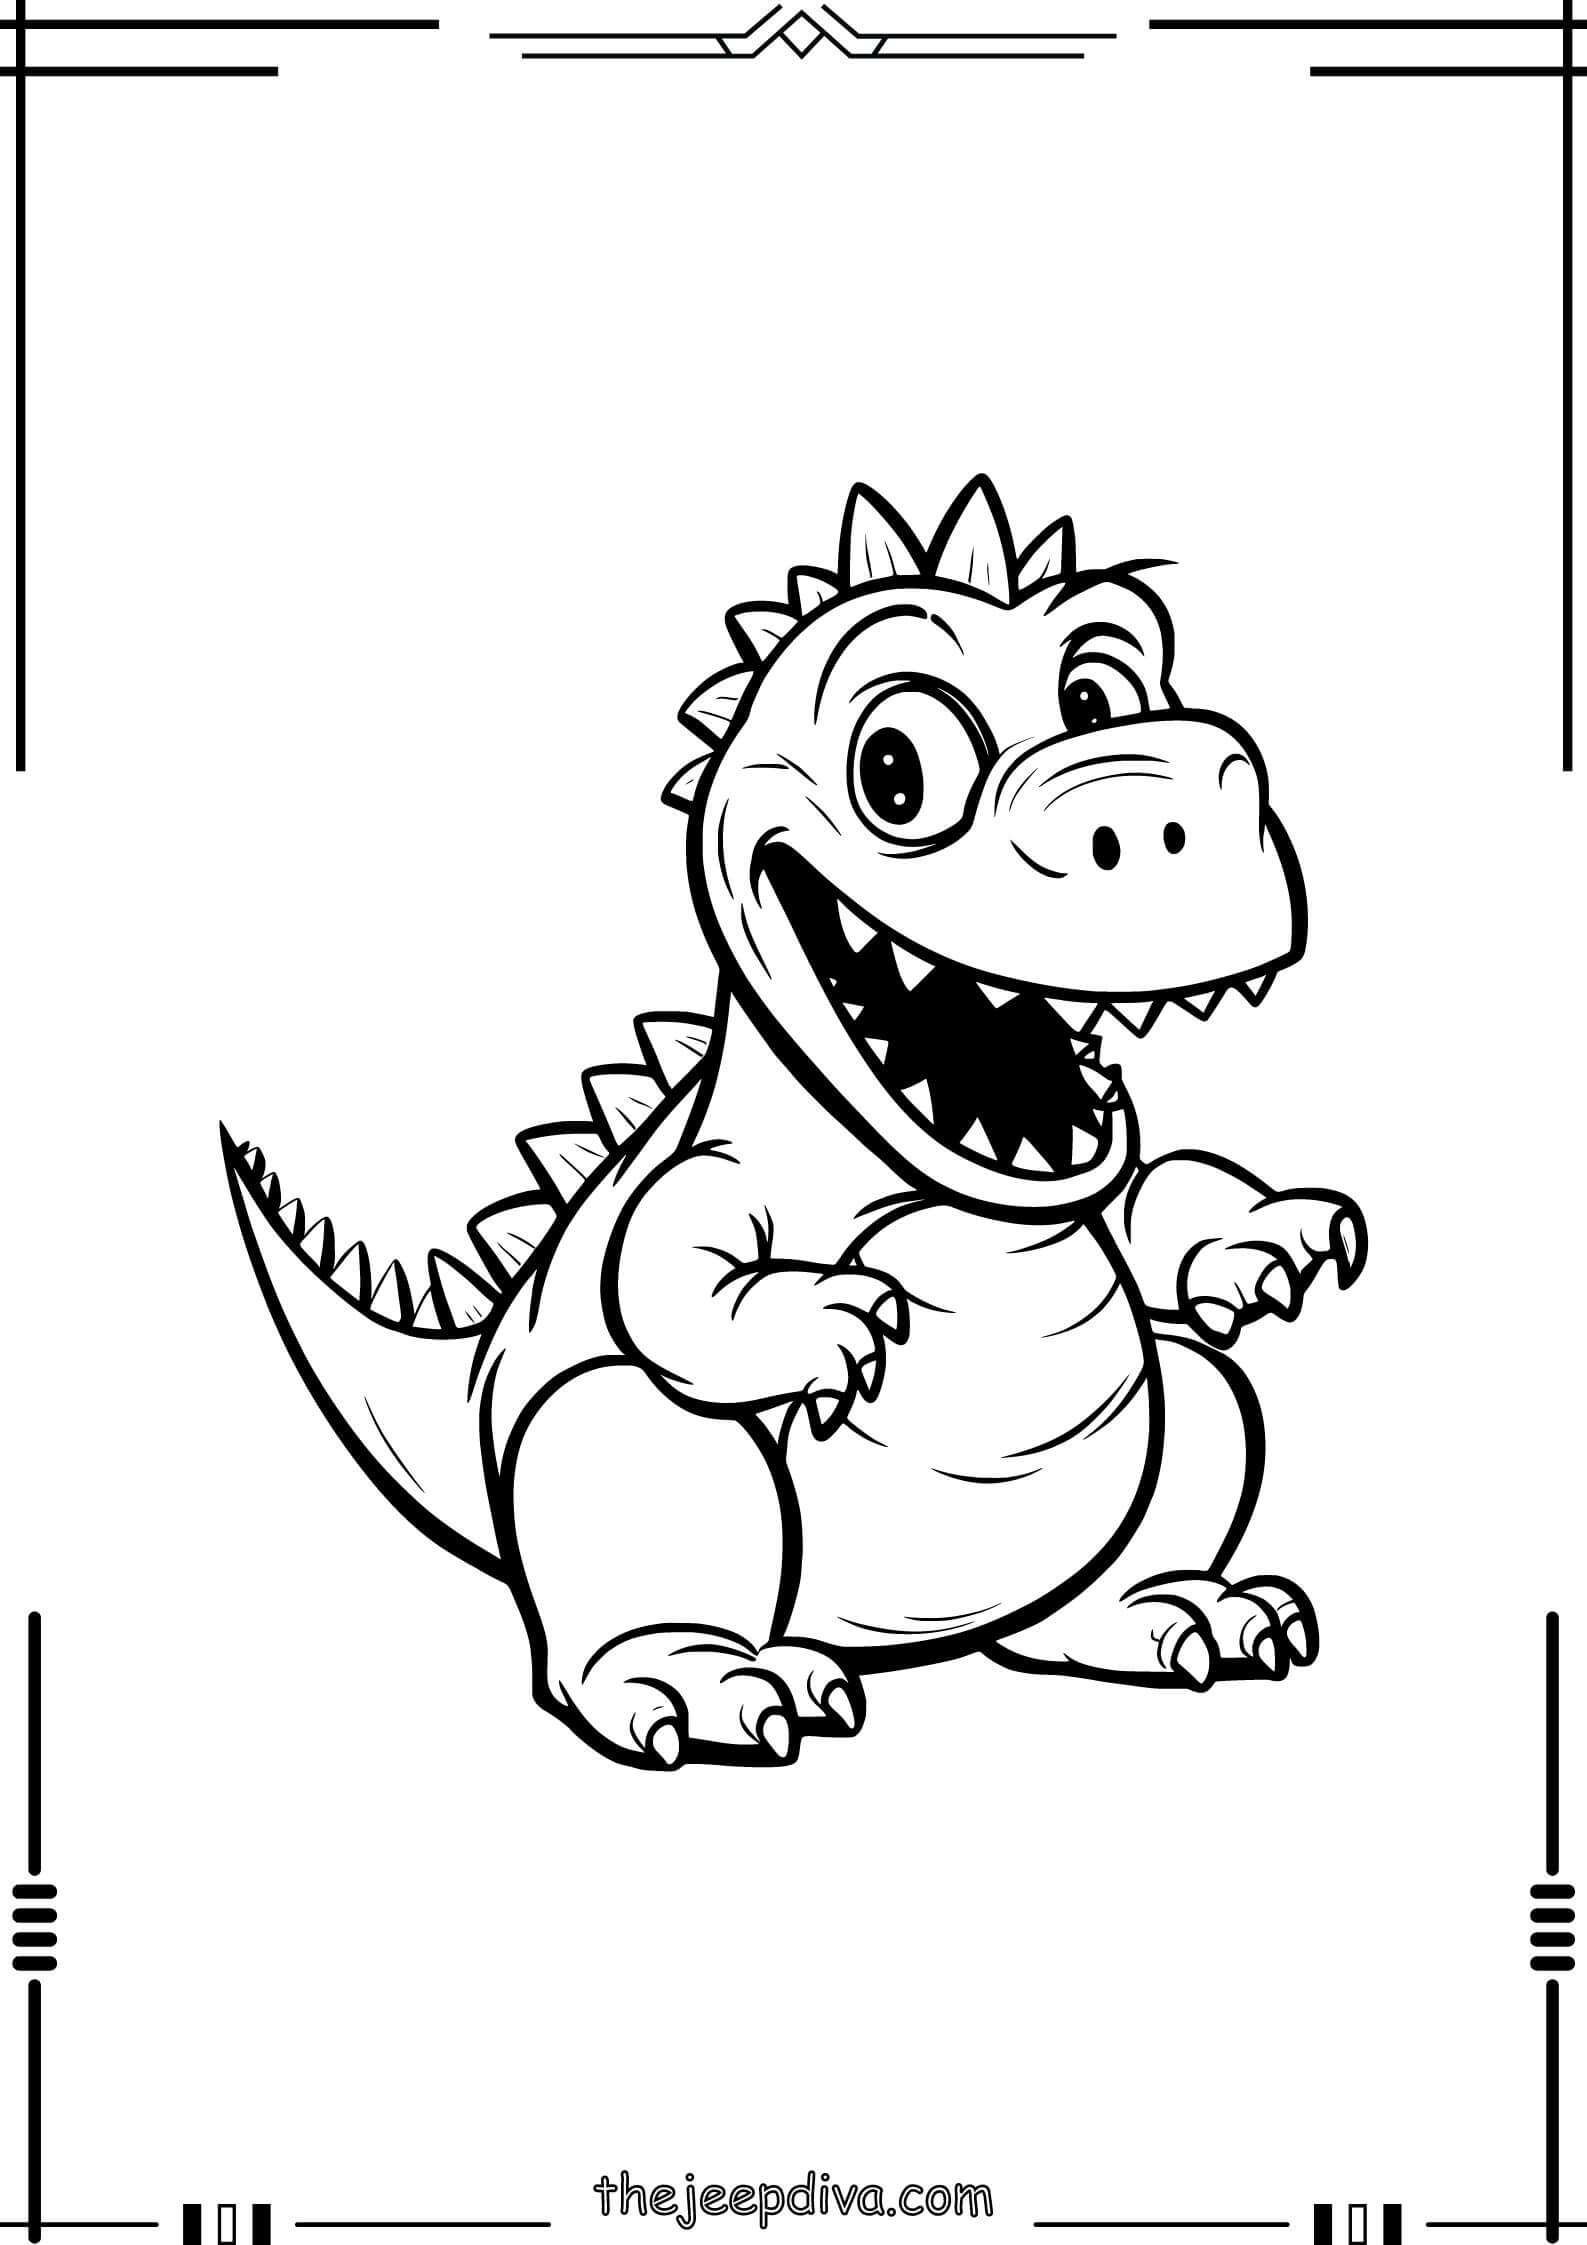 Dinosaur-Colouring-Pages-Easy-7